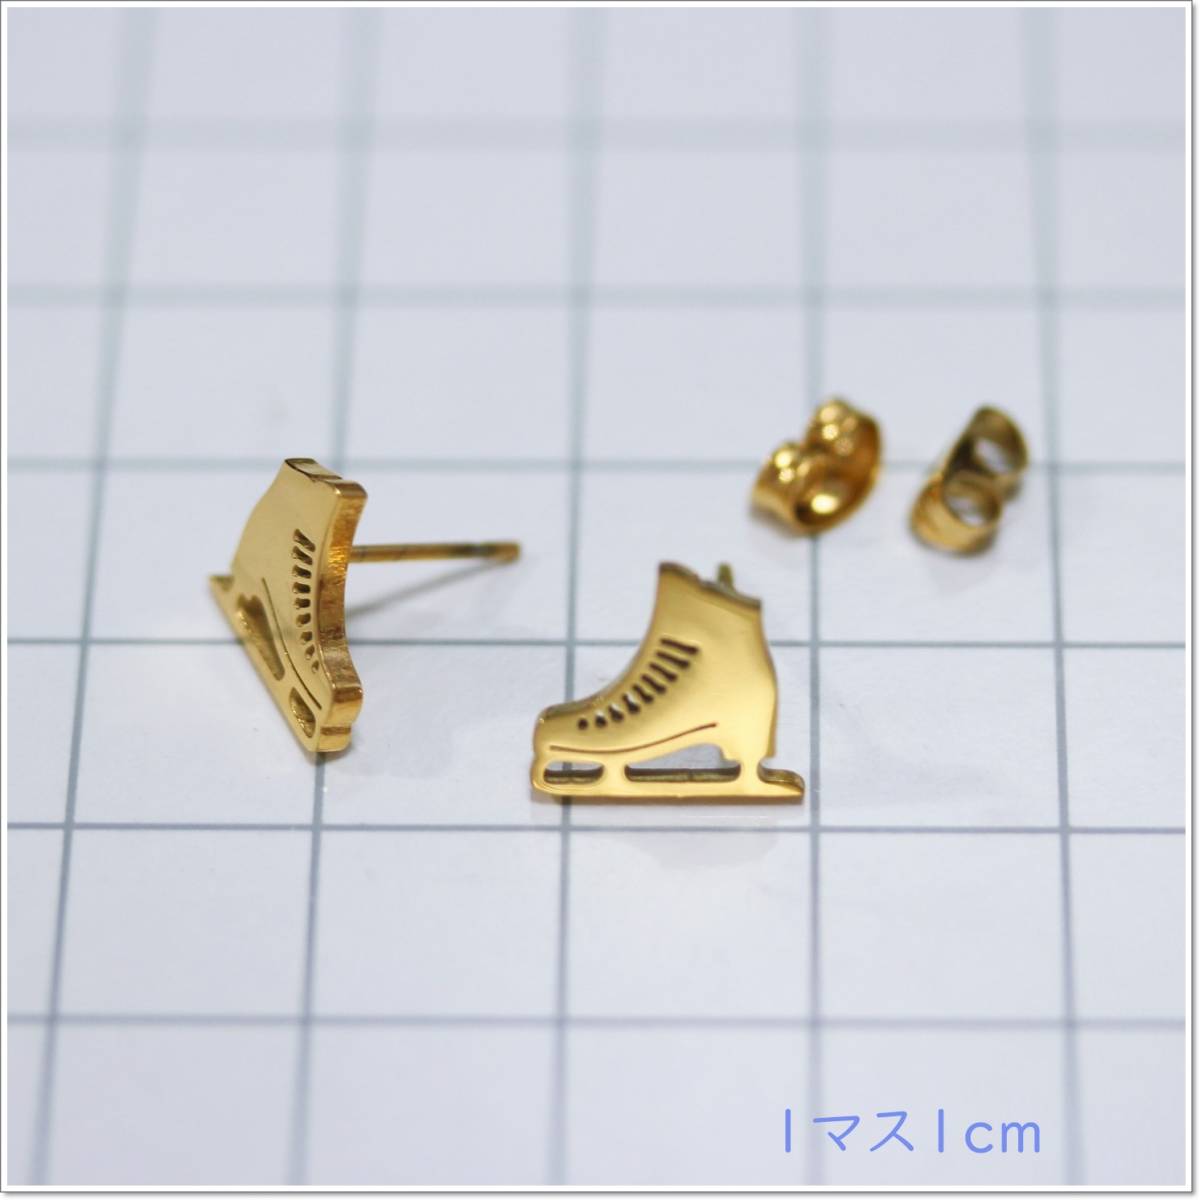 EP7754/ skate shoes earrings all made of stainless steel gold color 18 gold processing Gold skates figure skating surgical stainless steel 316L